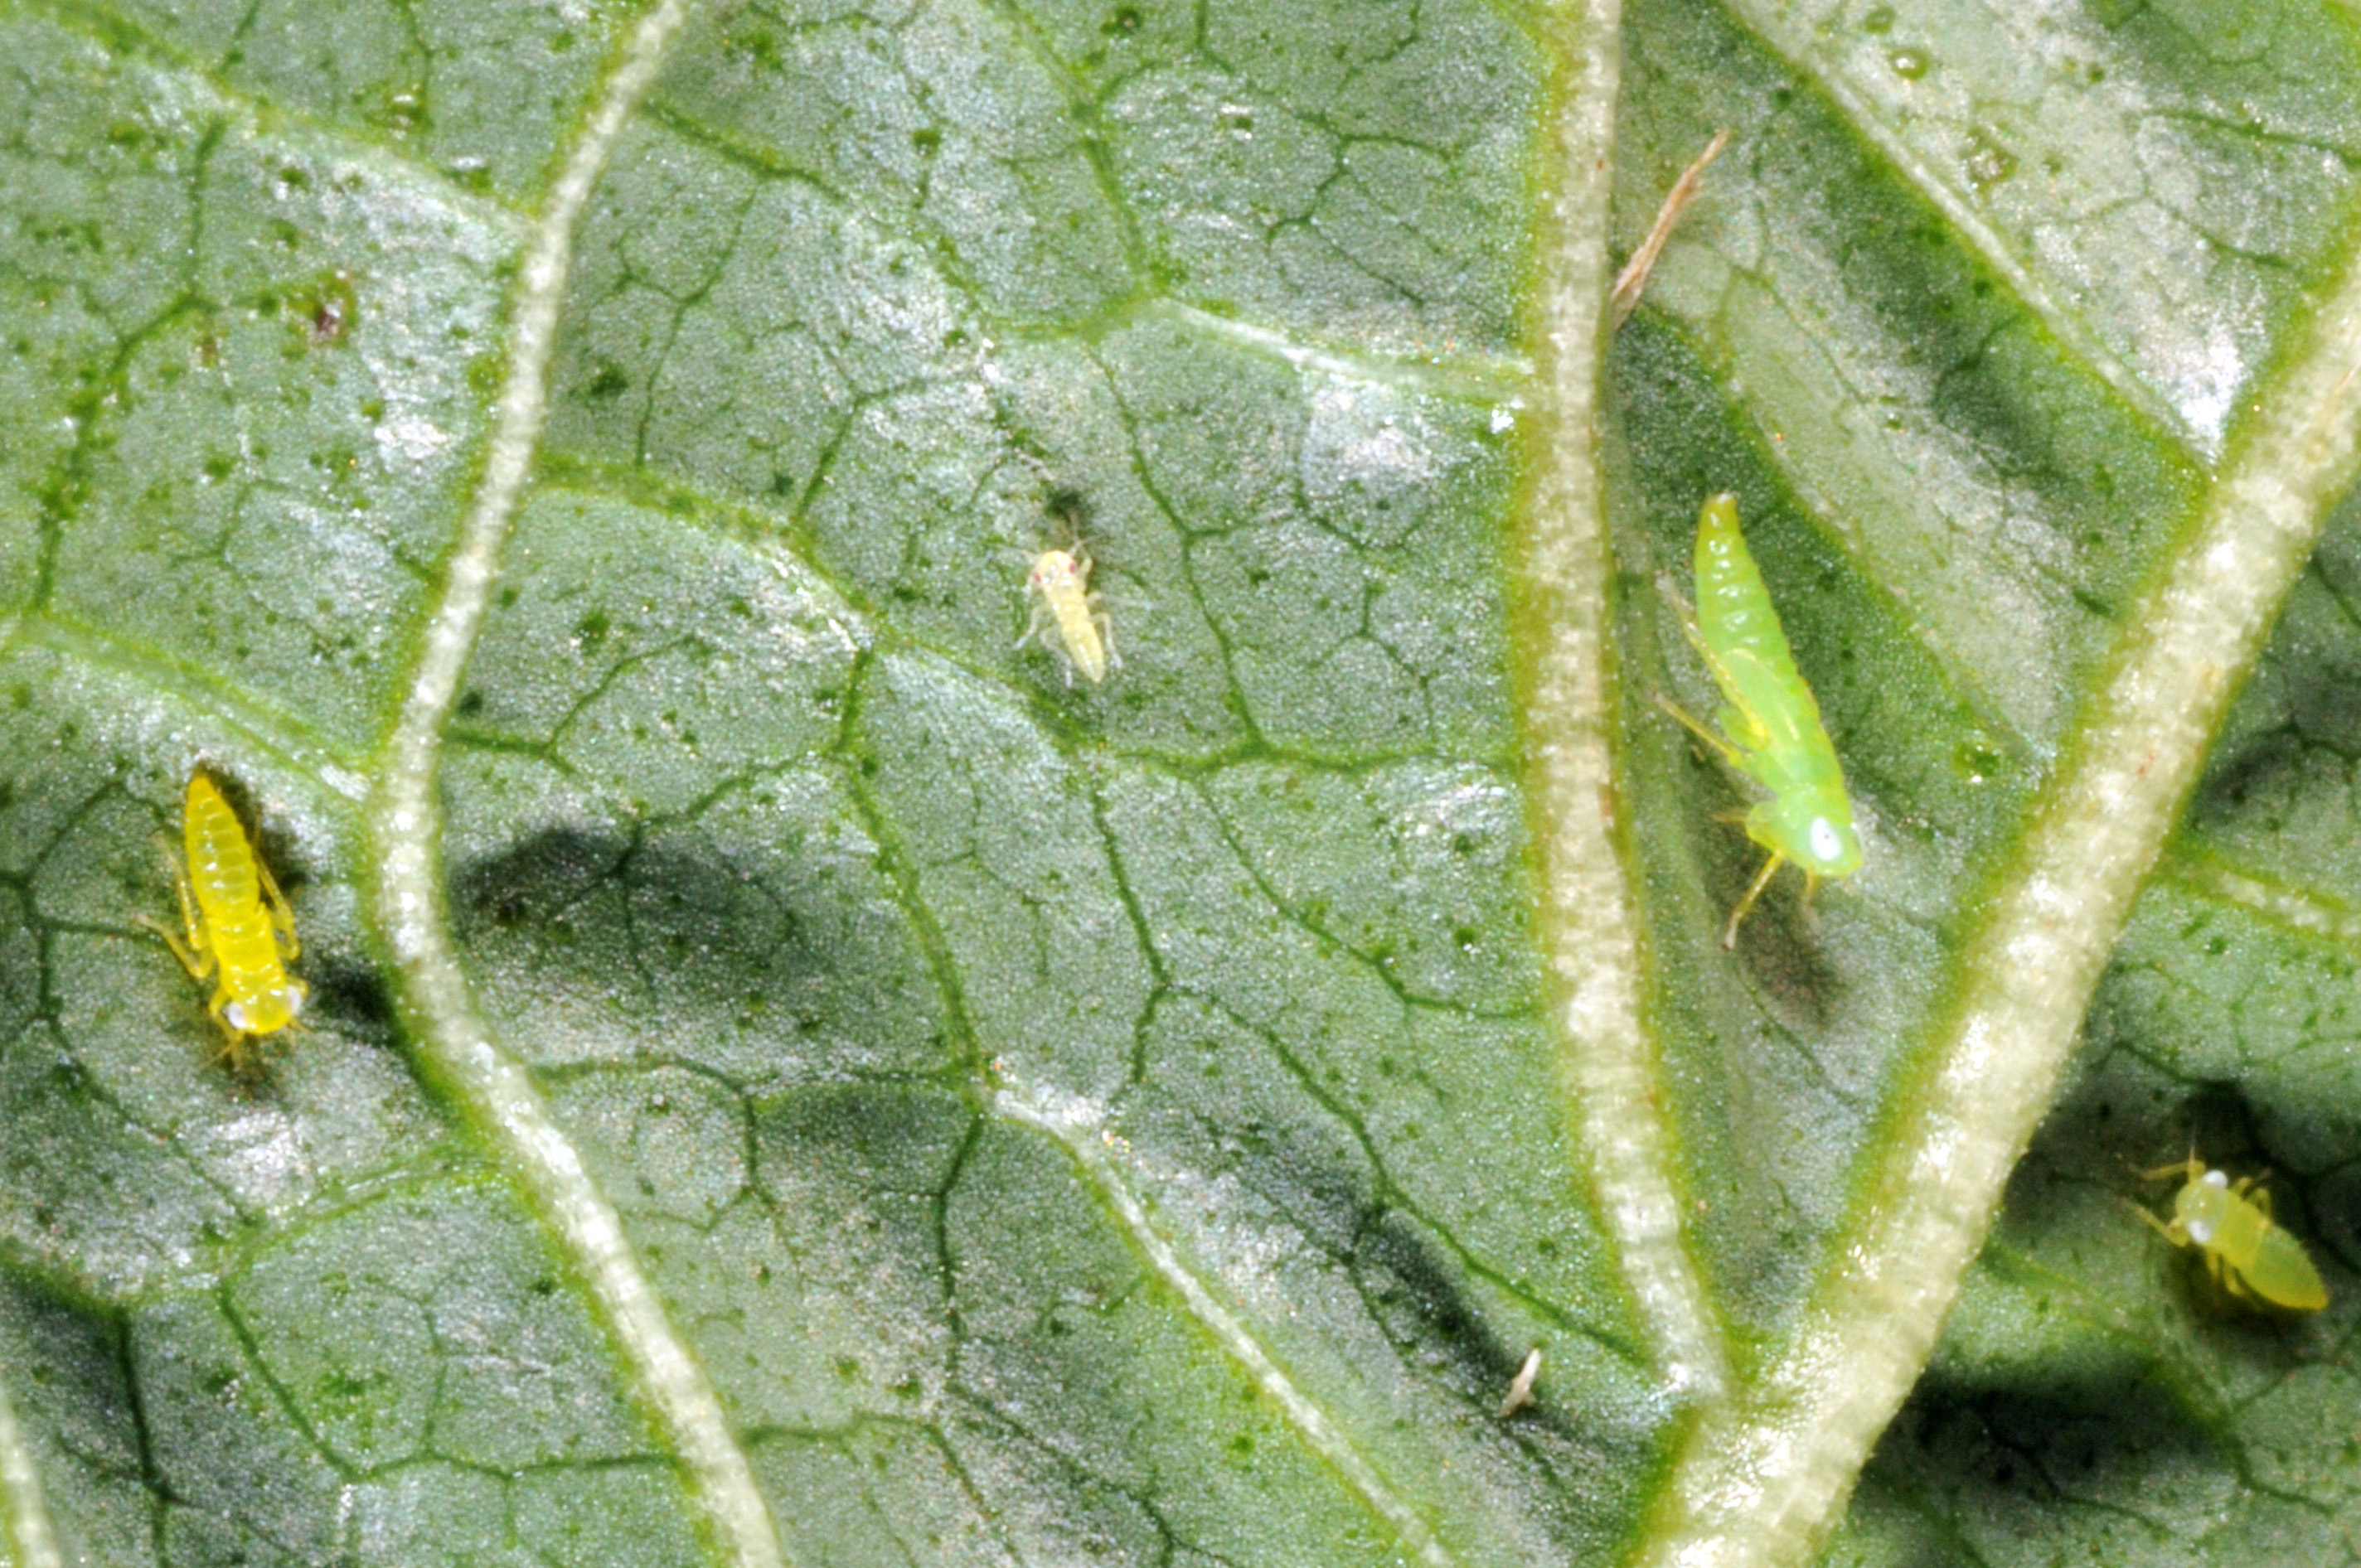 Potato leafhoppers adult and nymphs